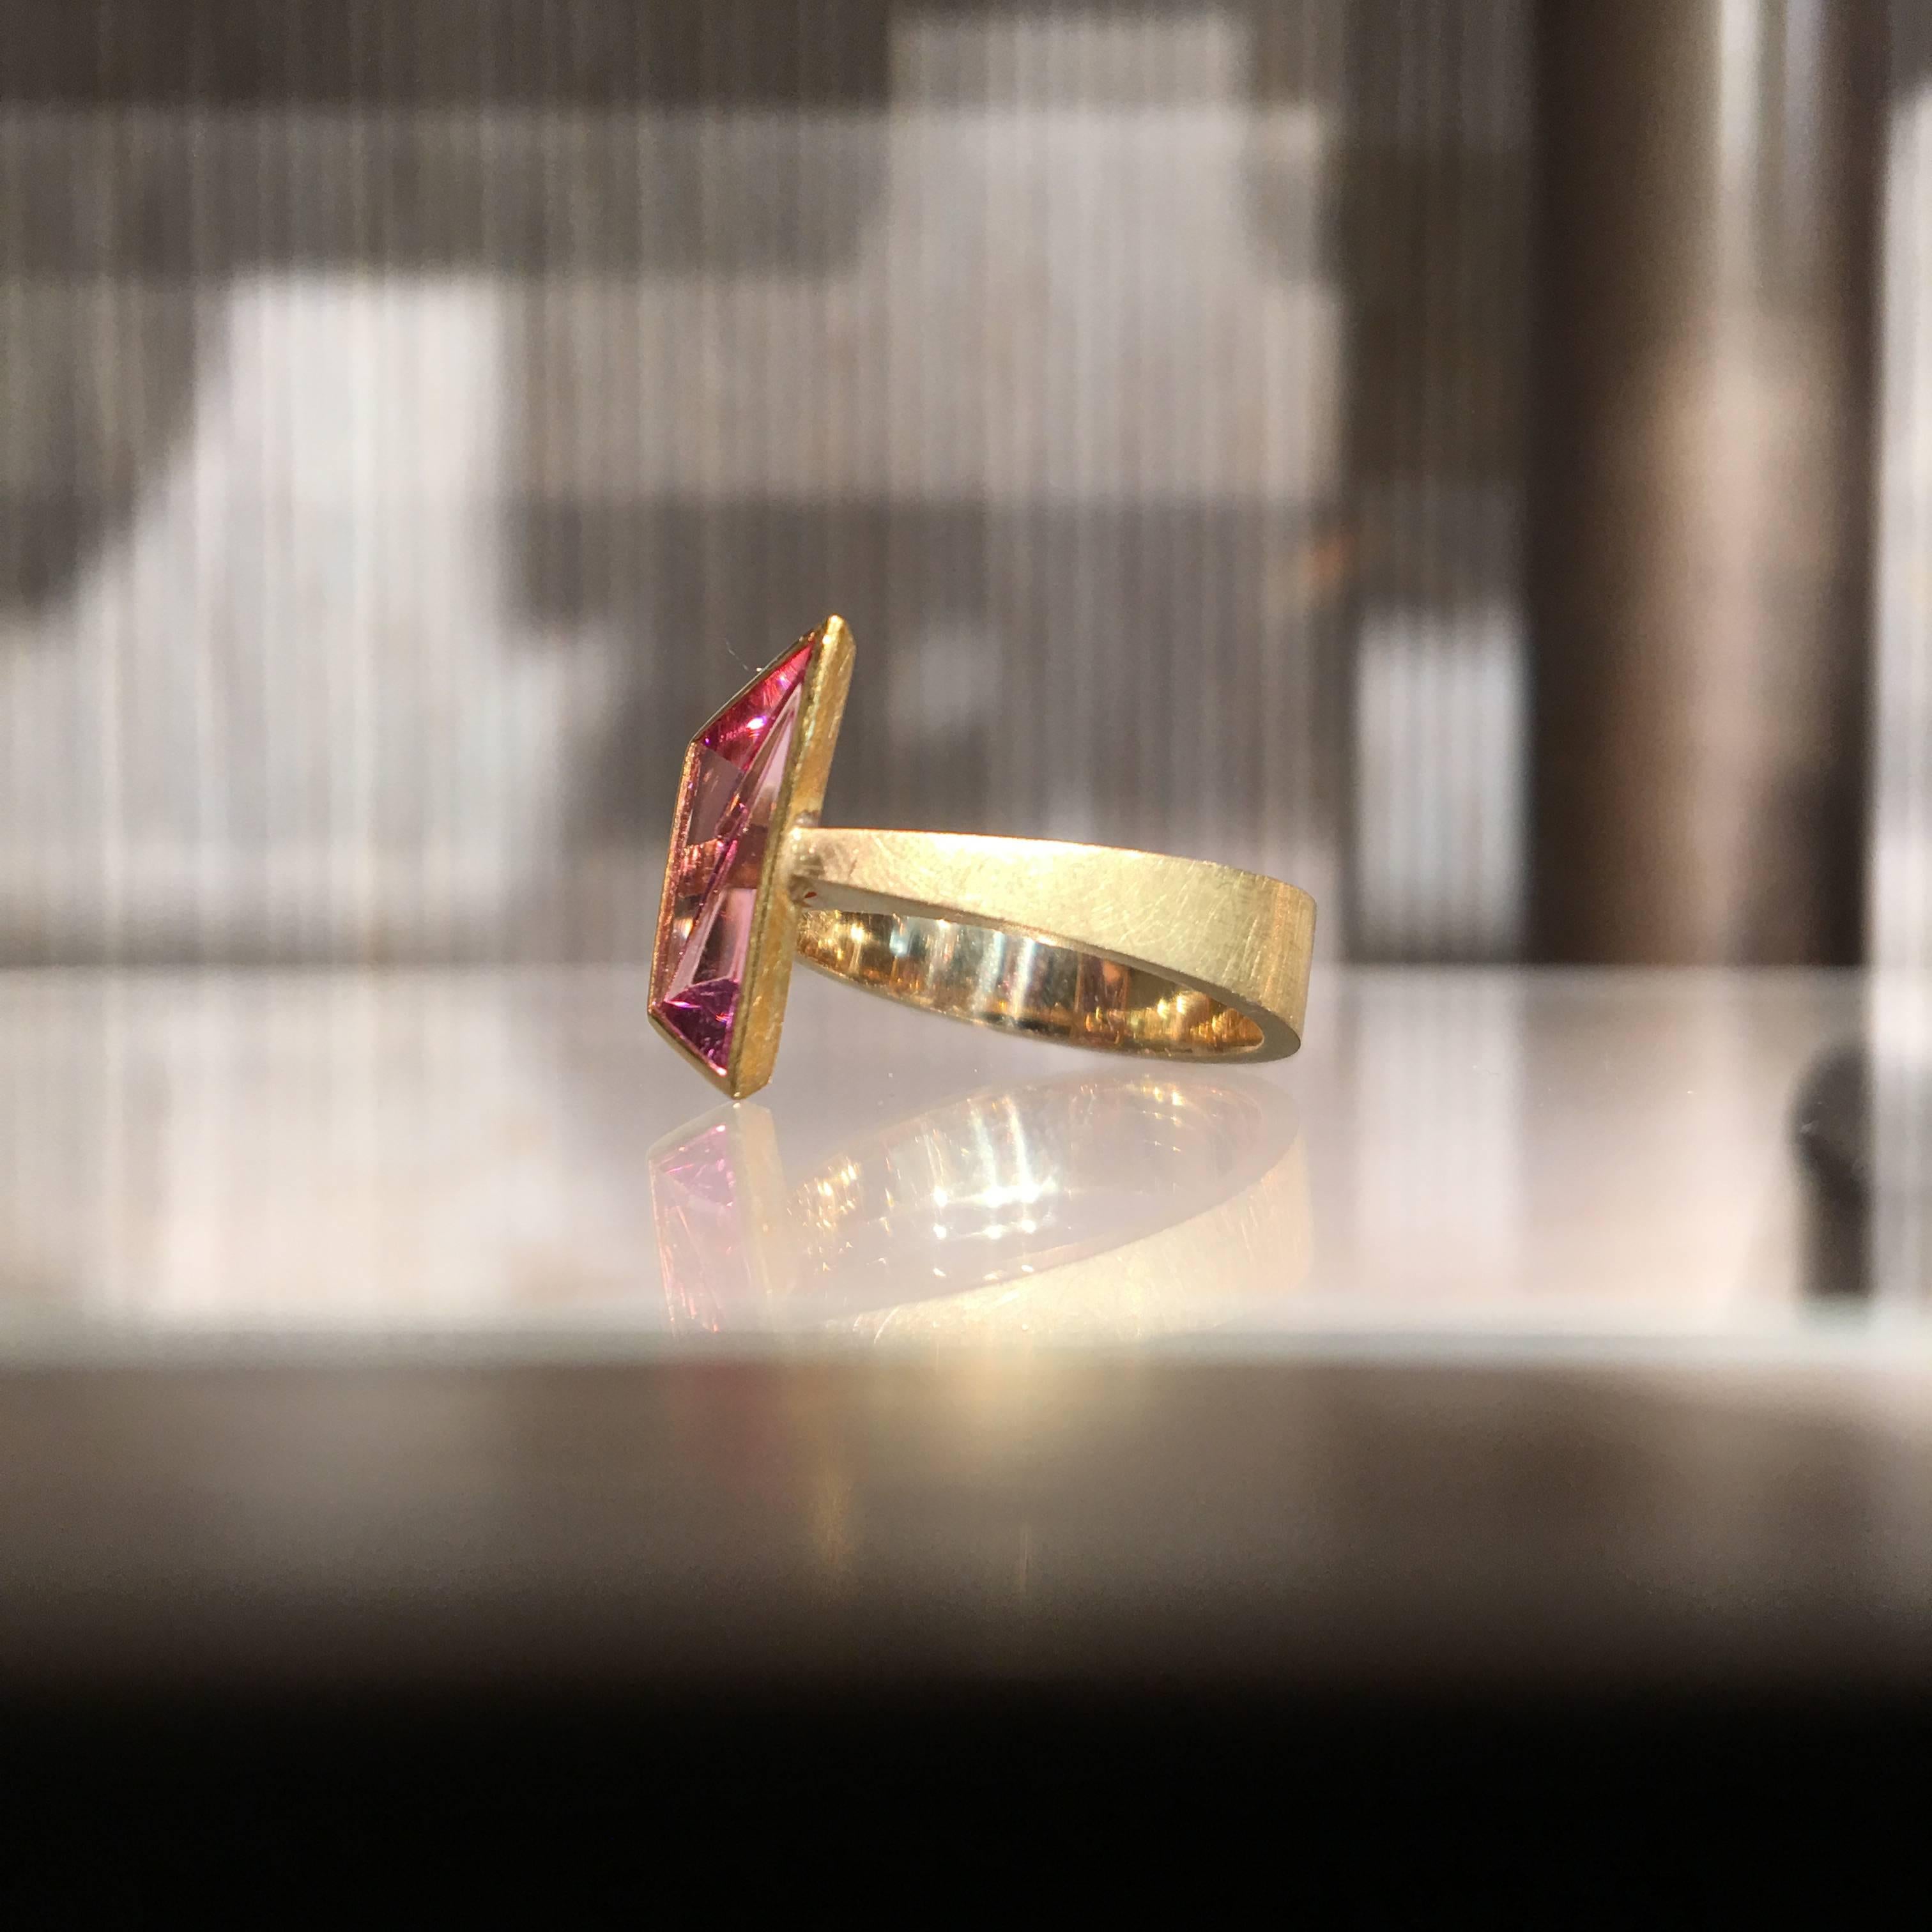 One of a Kind Ring handcrafted in Barcelona, Spain by jewelry artist Enric Majoral in highly textured and matte-finished 18k yellow gold showcasing a gorgeous pink tourmaline hand-cut in Germany by the "Picasso of Gems", Atelier